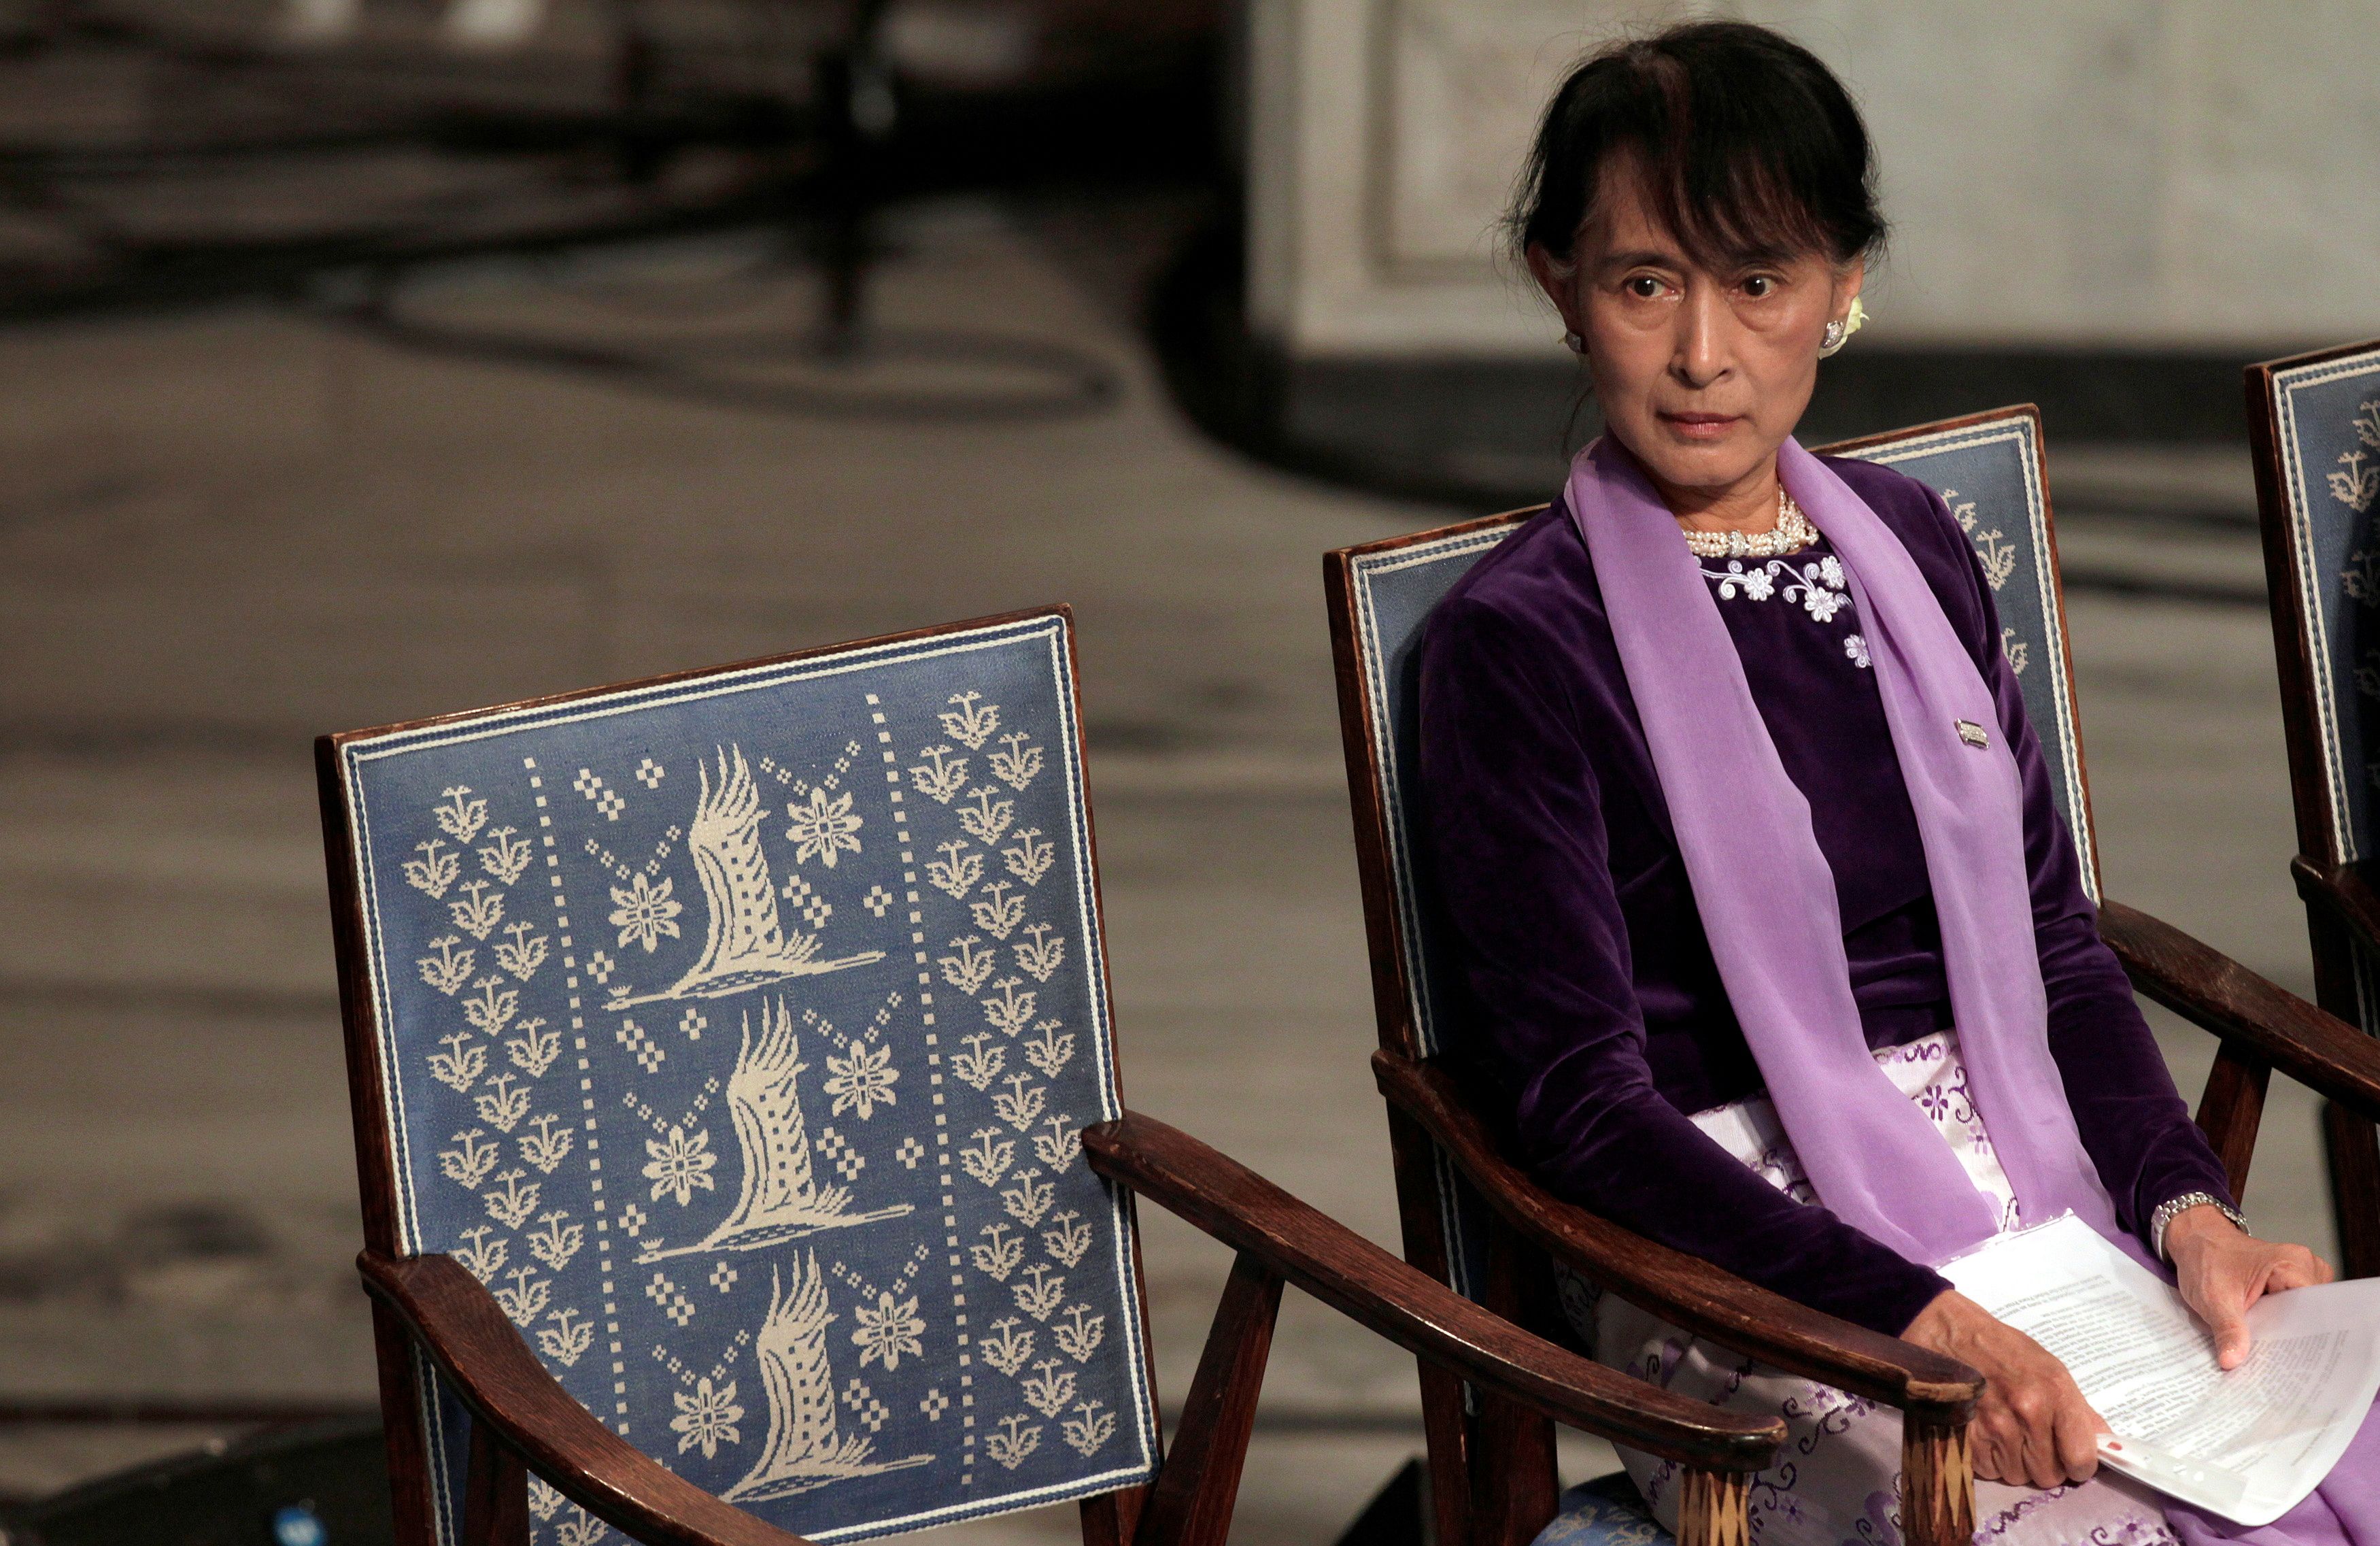 Myanmar opposition leader Aung San Suu Kyi sits before giving her Nobel Lecture at City Hall in Oslo